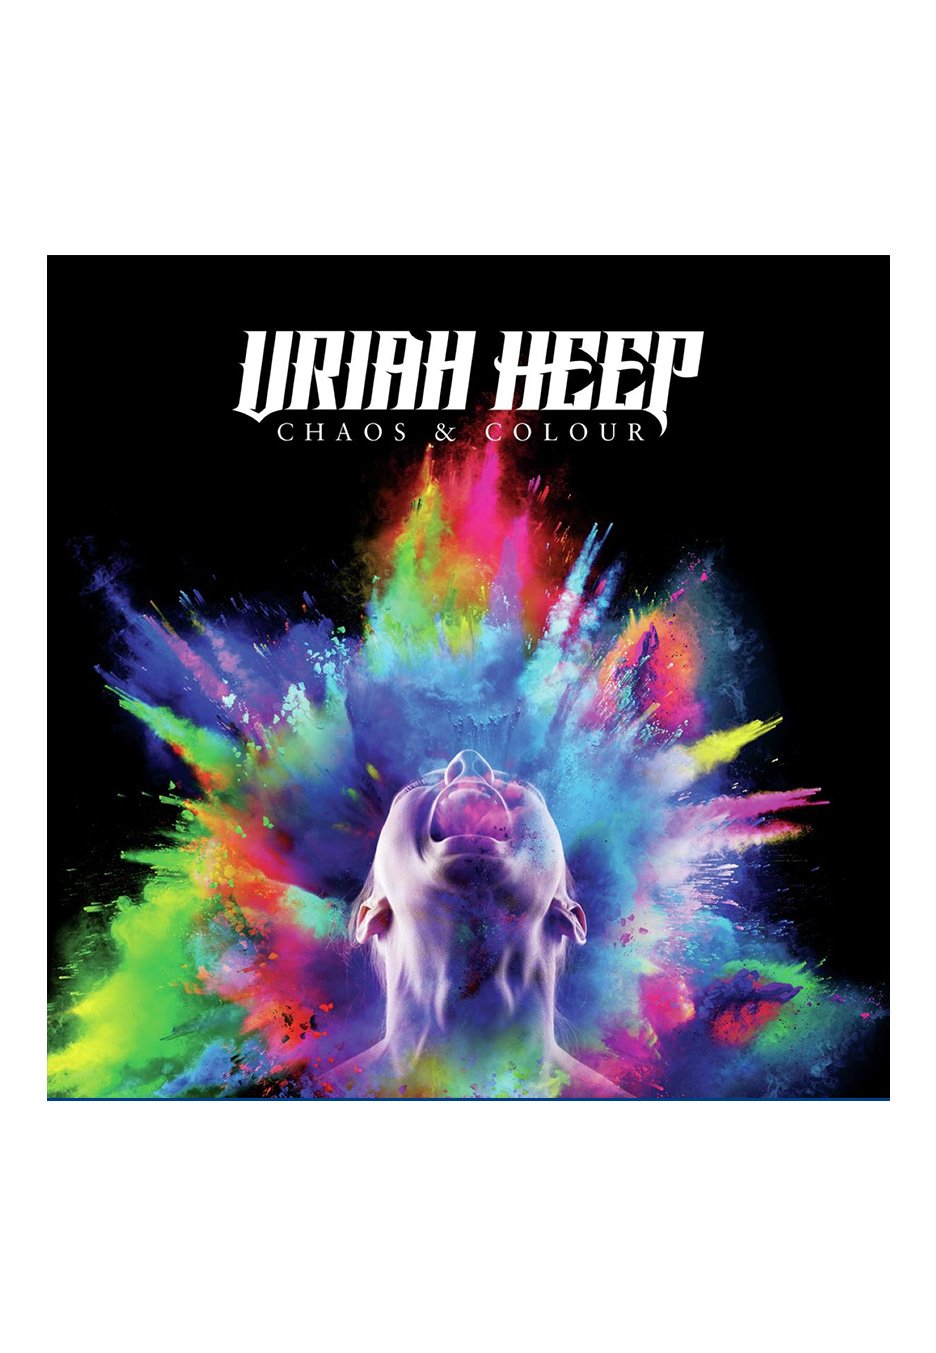 Uriah Heep - Chaos & Colour (Deluxe) - Hardback Book CD + Patch